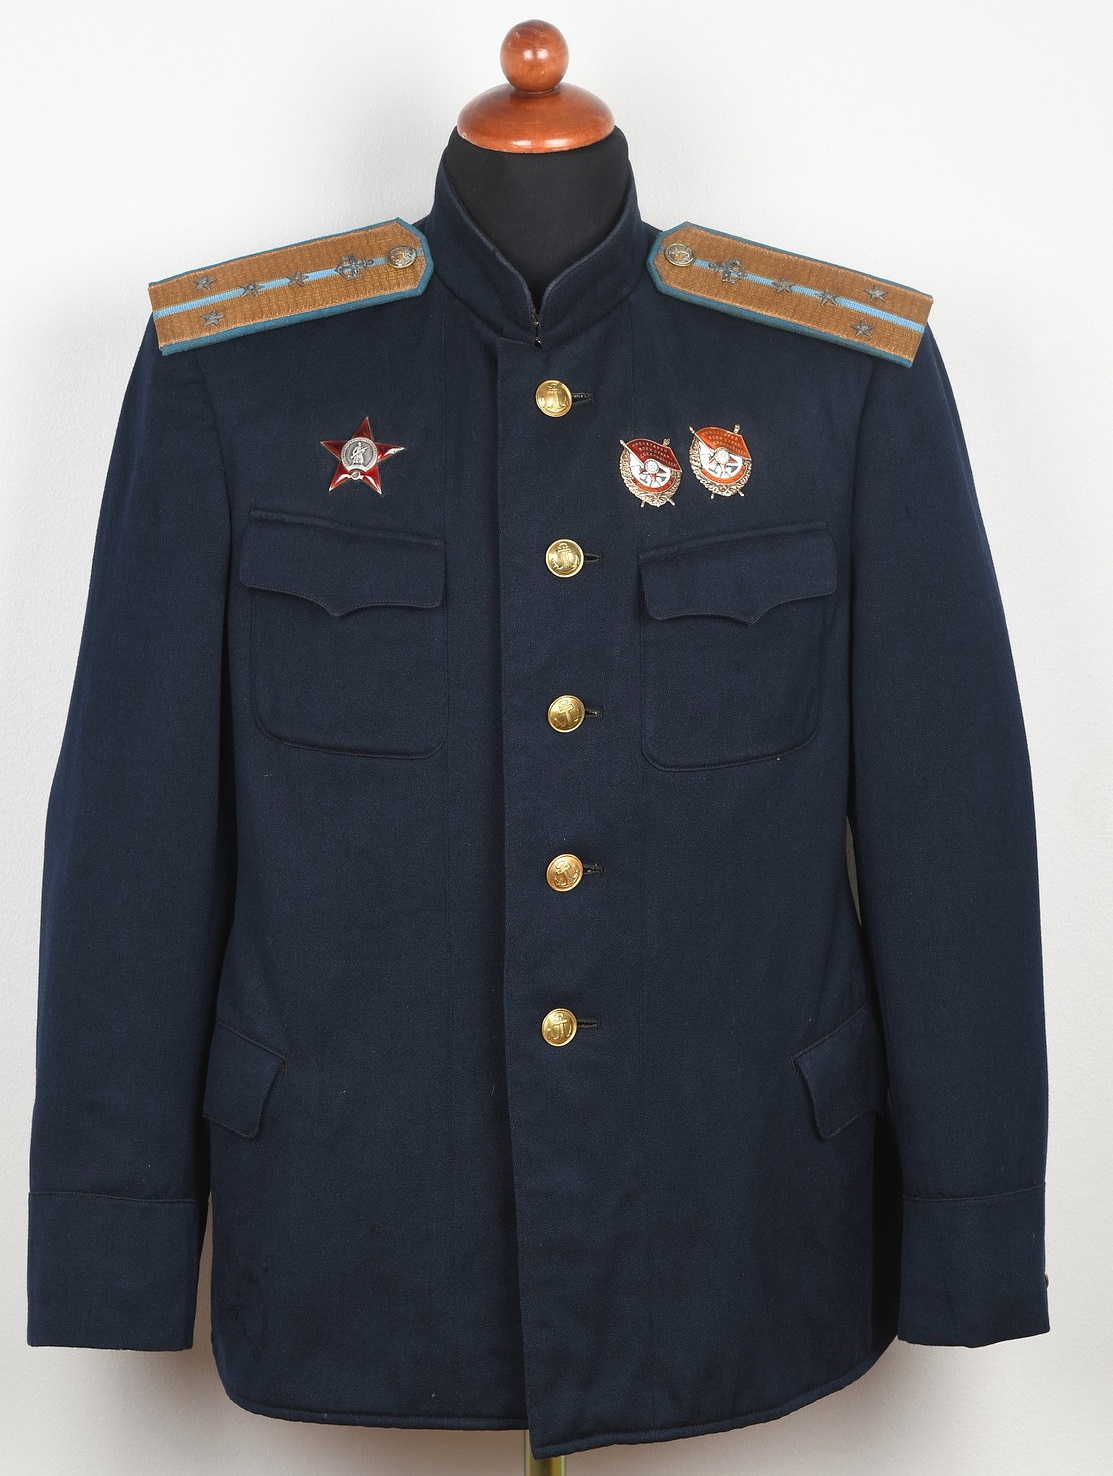 Russian WWII M43 Combat Tunic For a Naval Air Force Captain